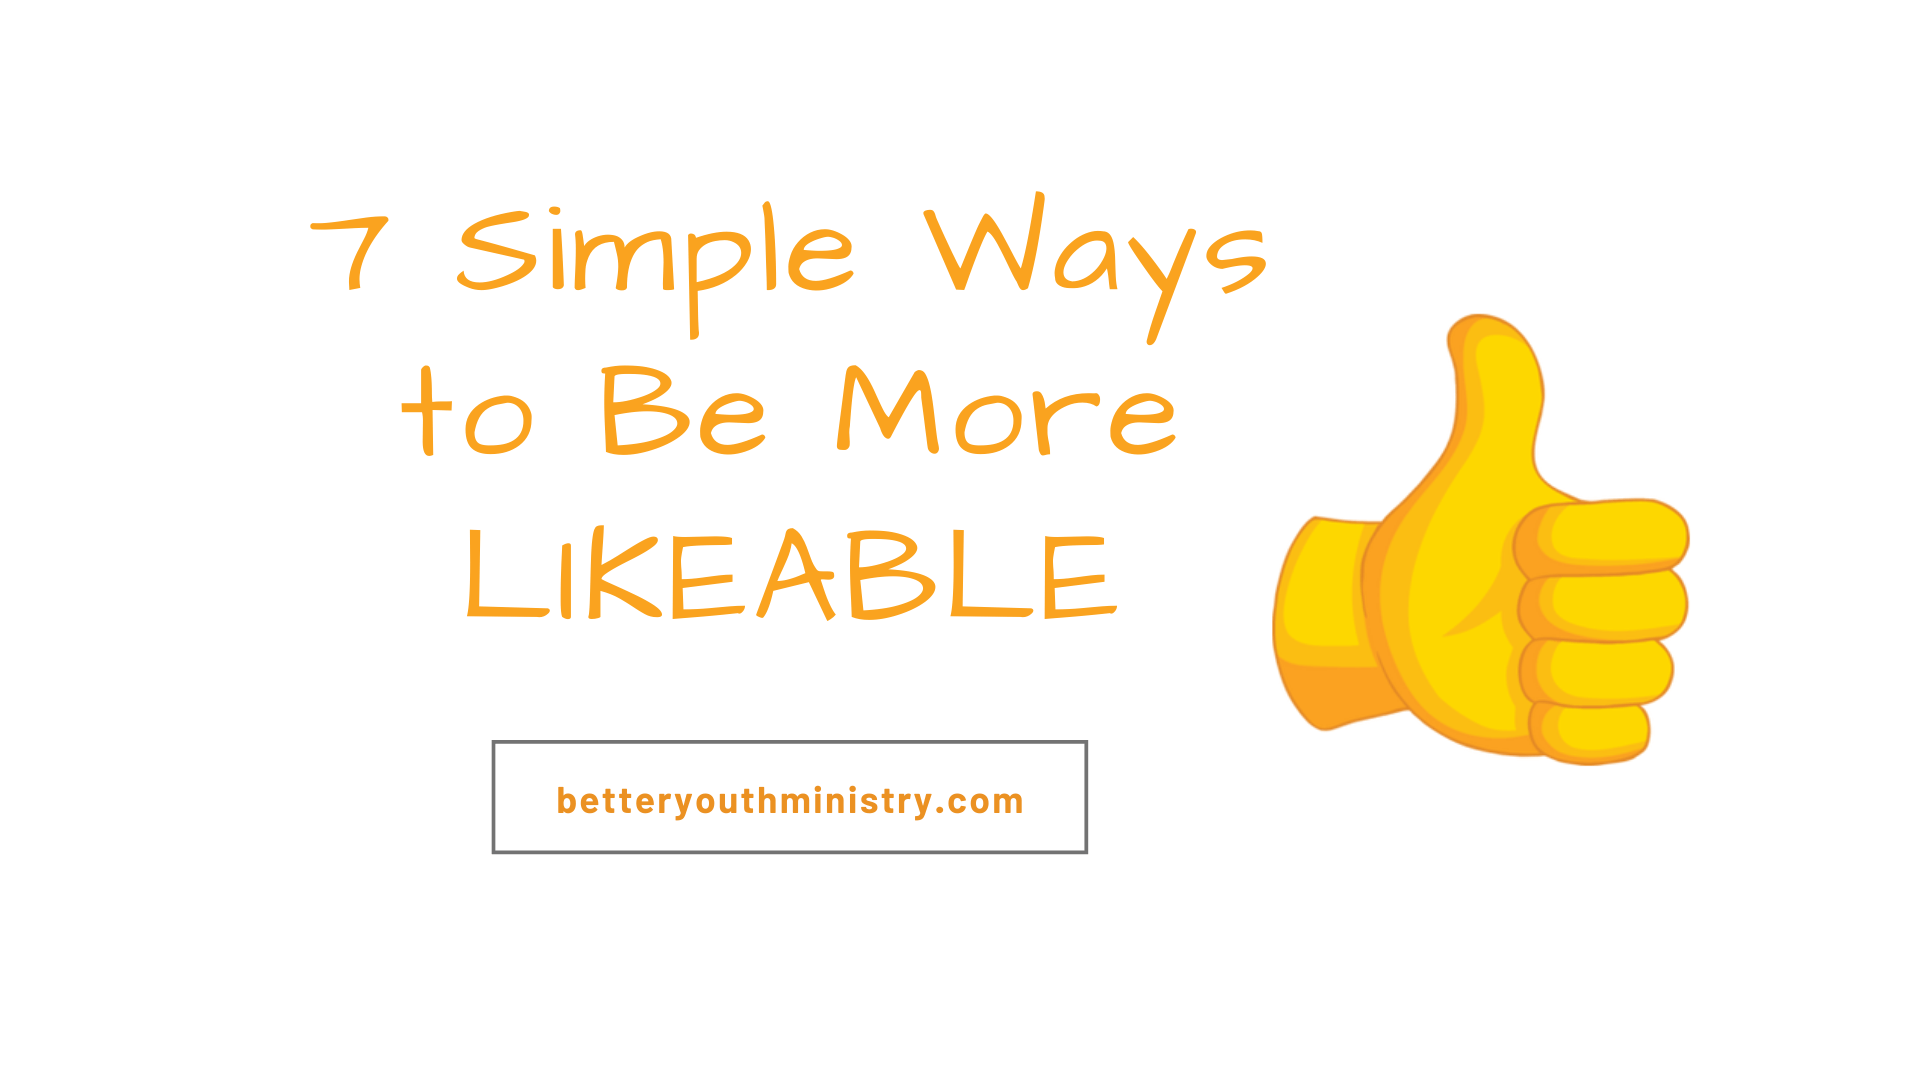 7 Simple Ways to be More Likeable